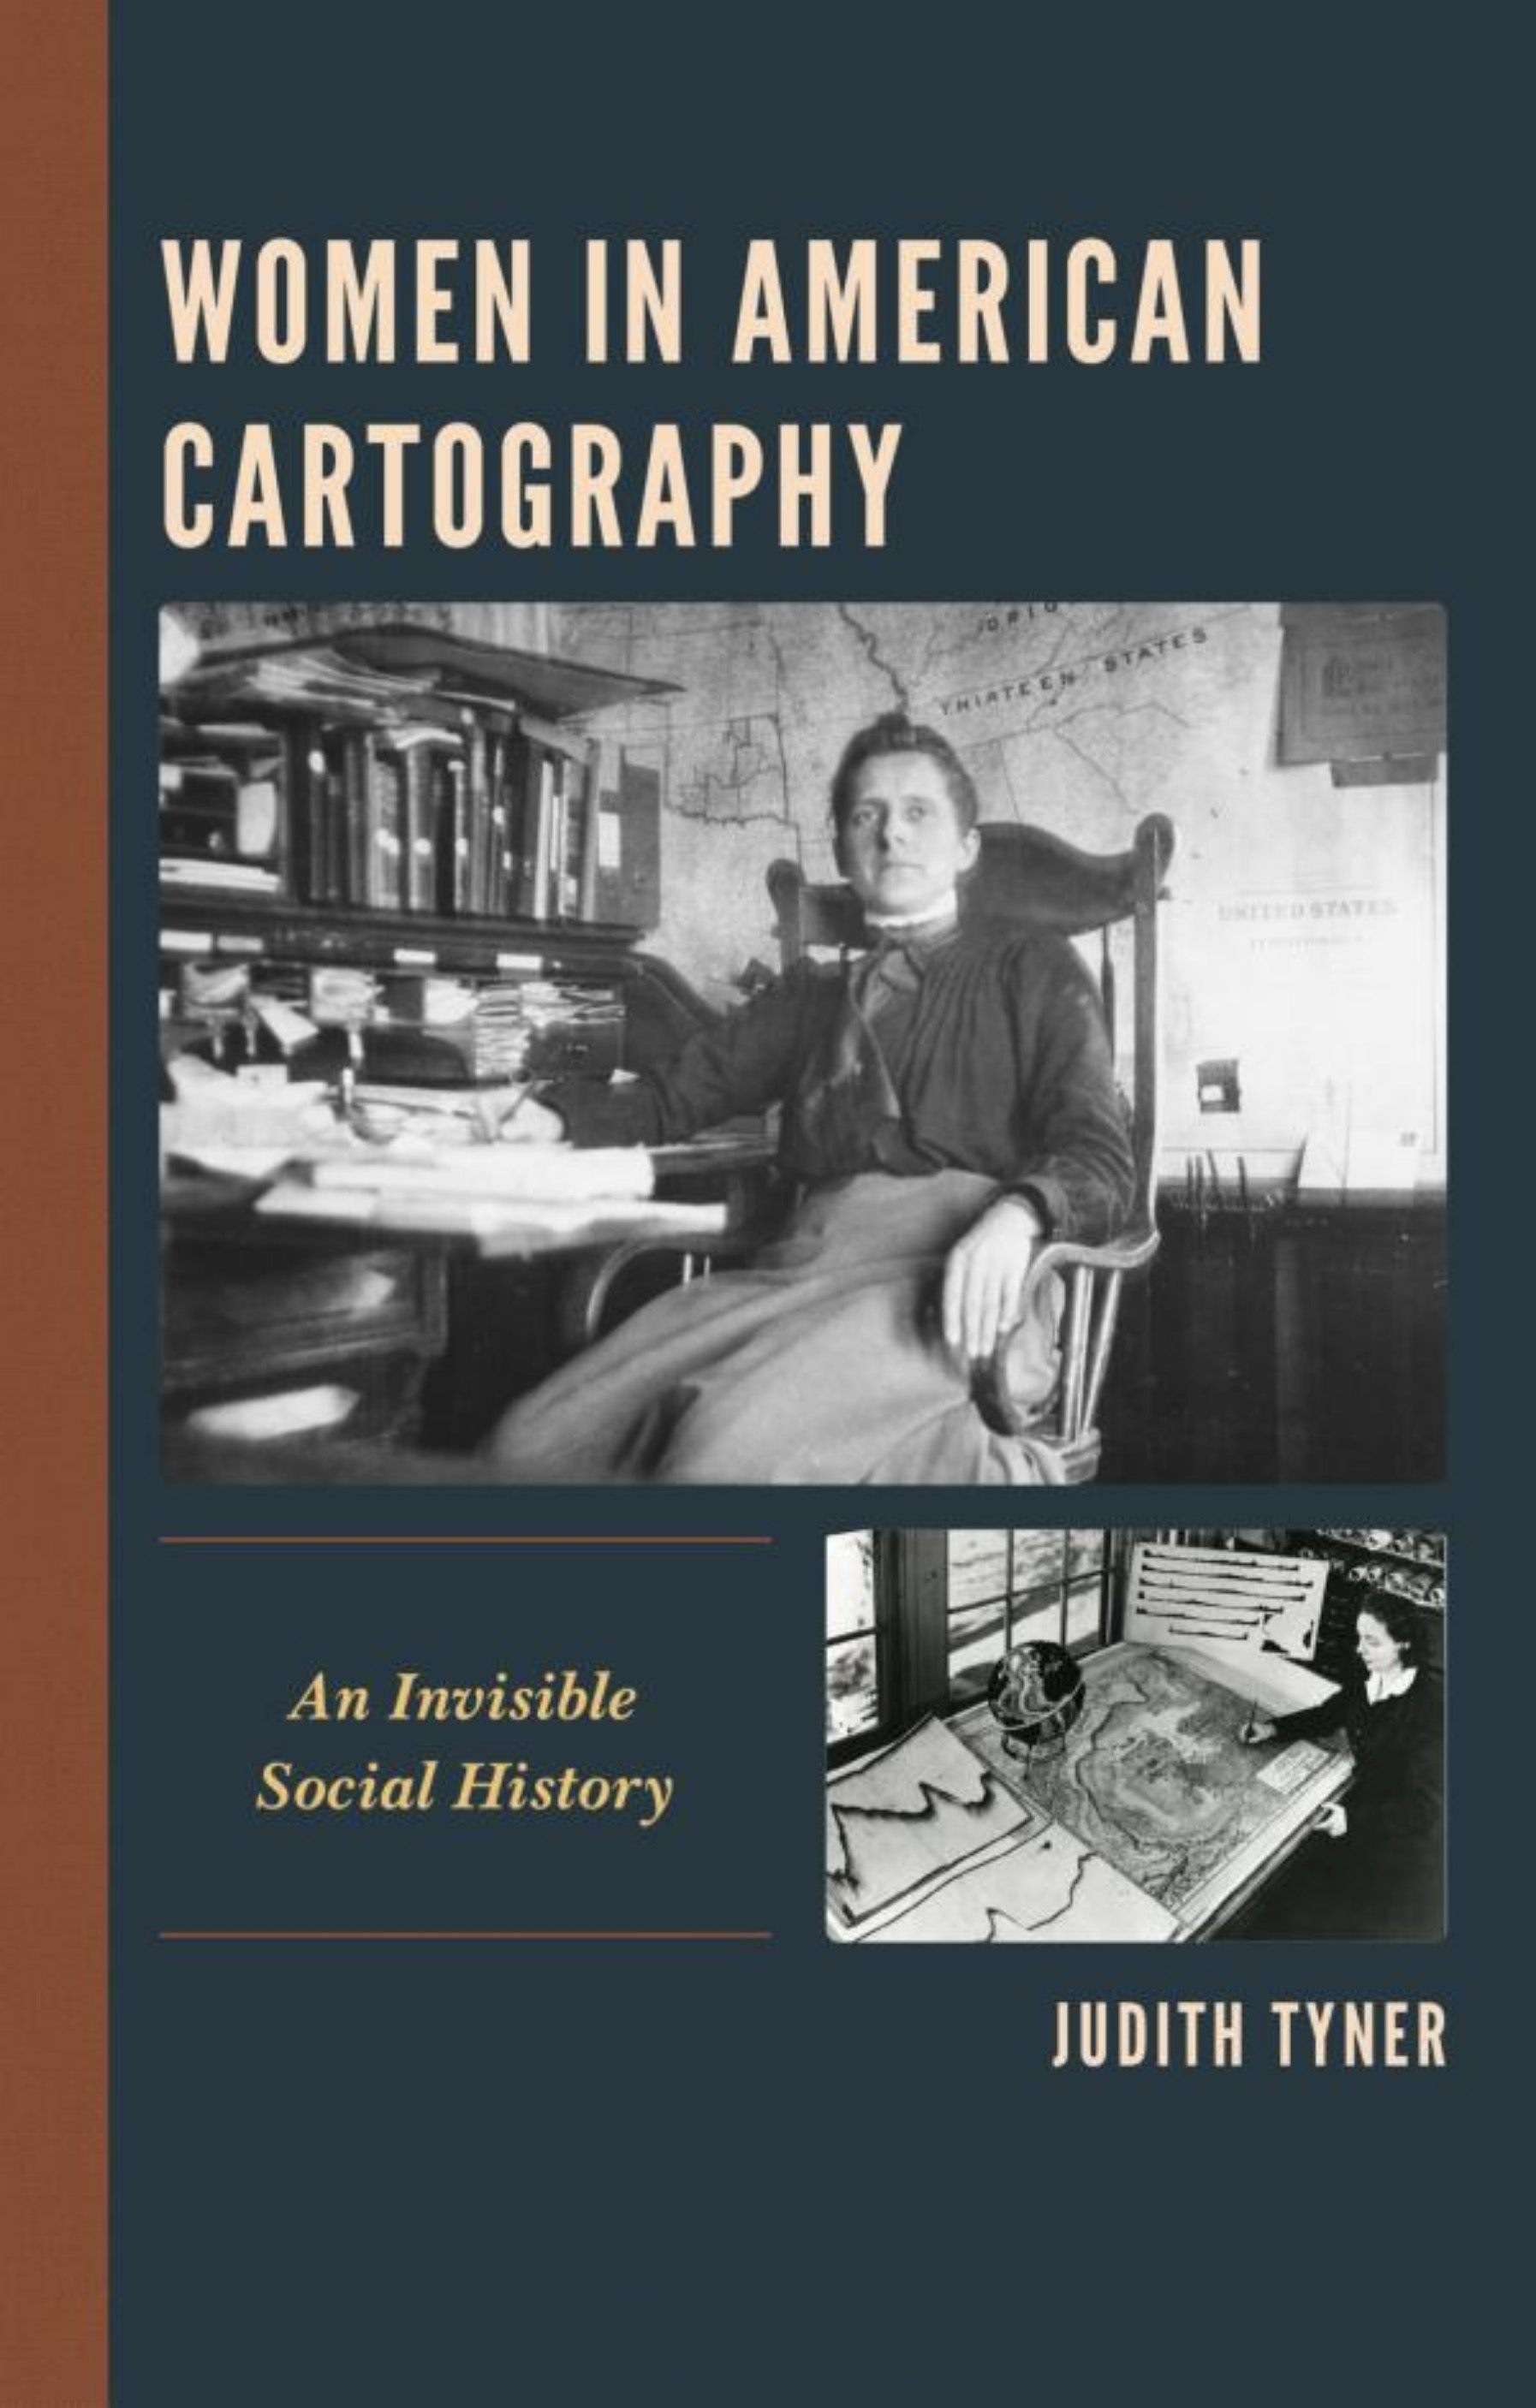 Women in American Cartography: An Invisible Social History